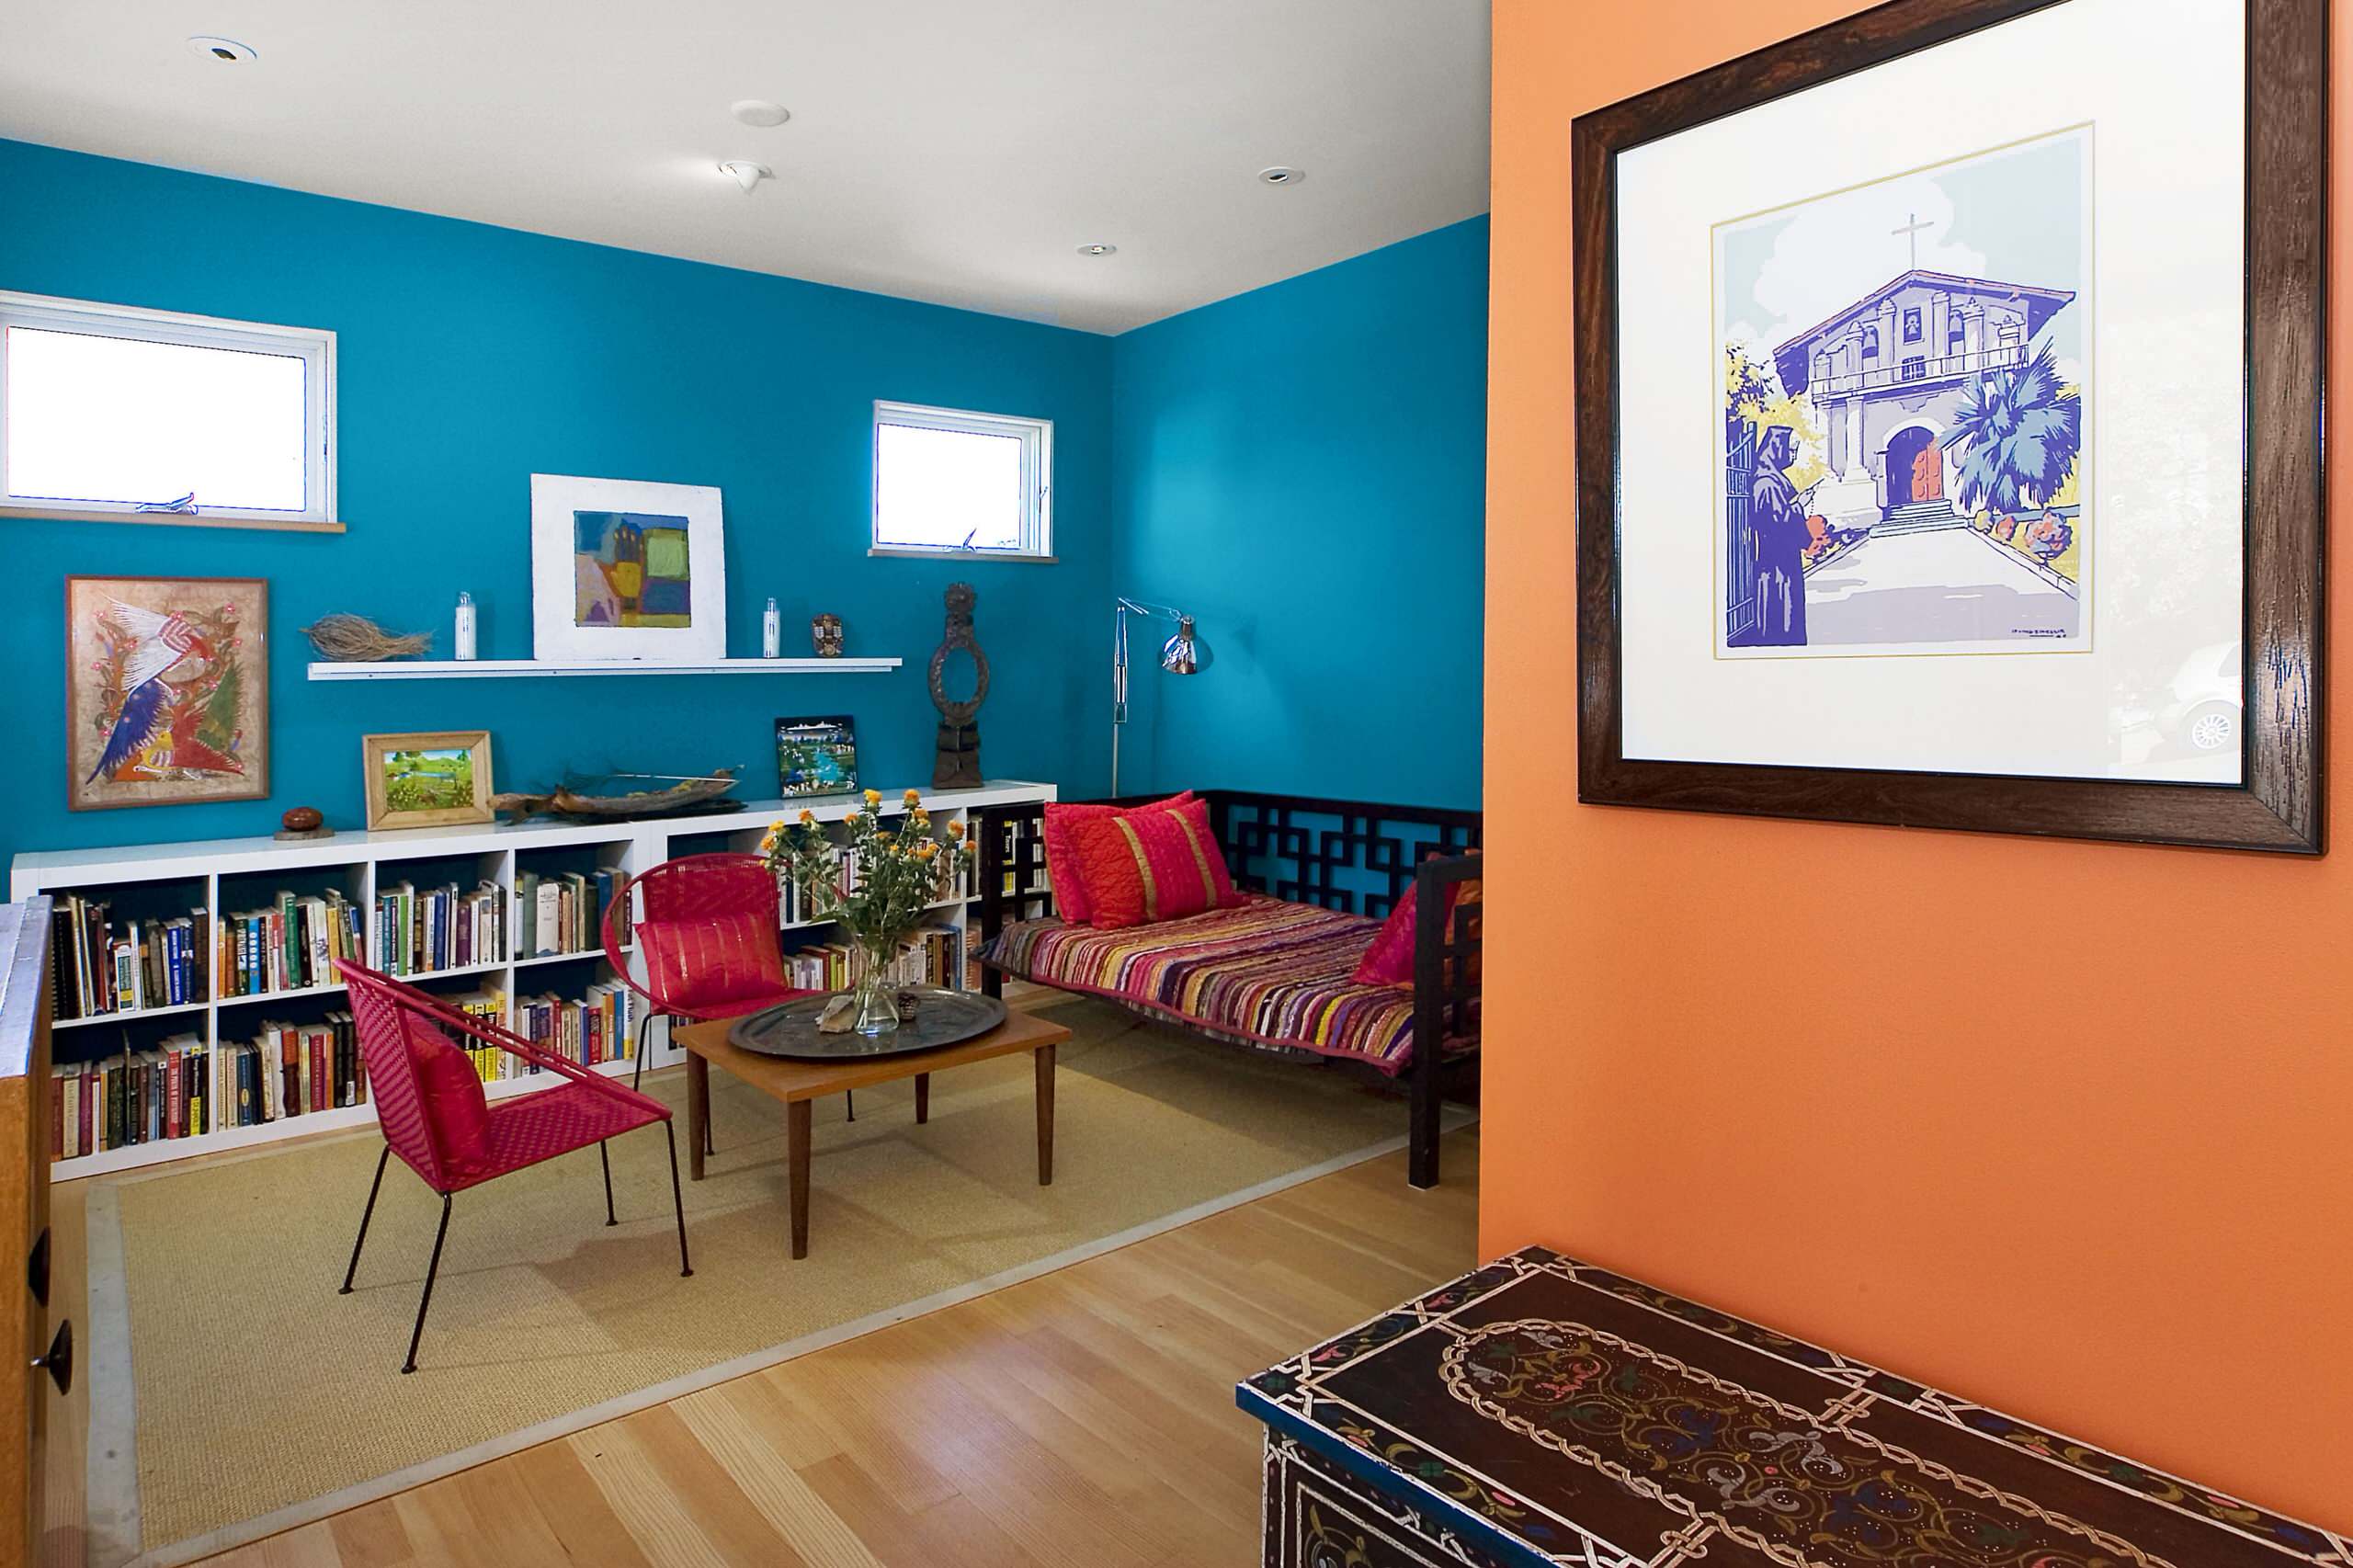 Teal And Orange Houzz, Teal And Orange Living Room